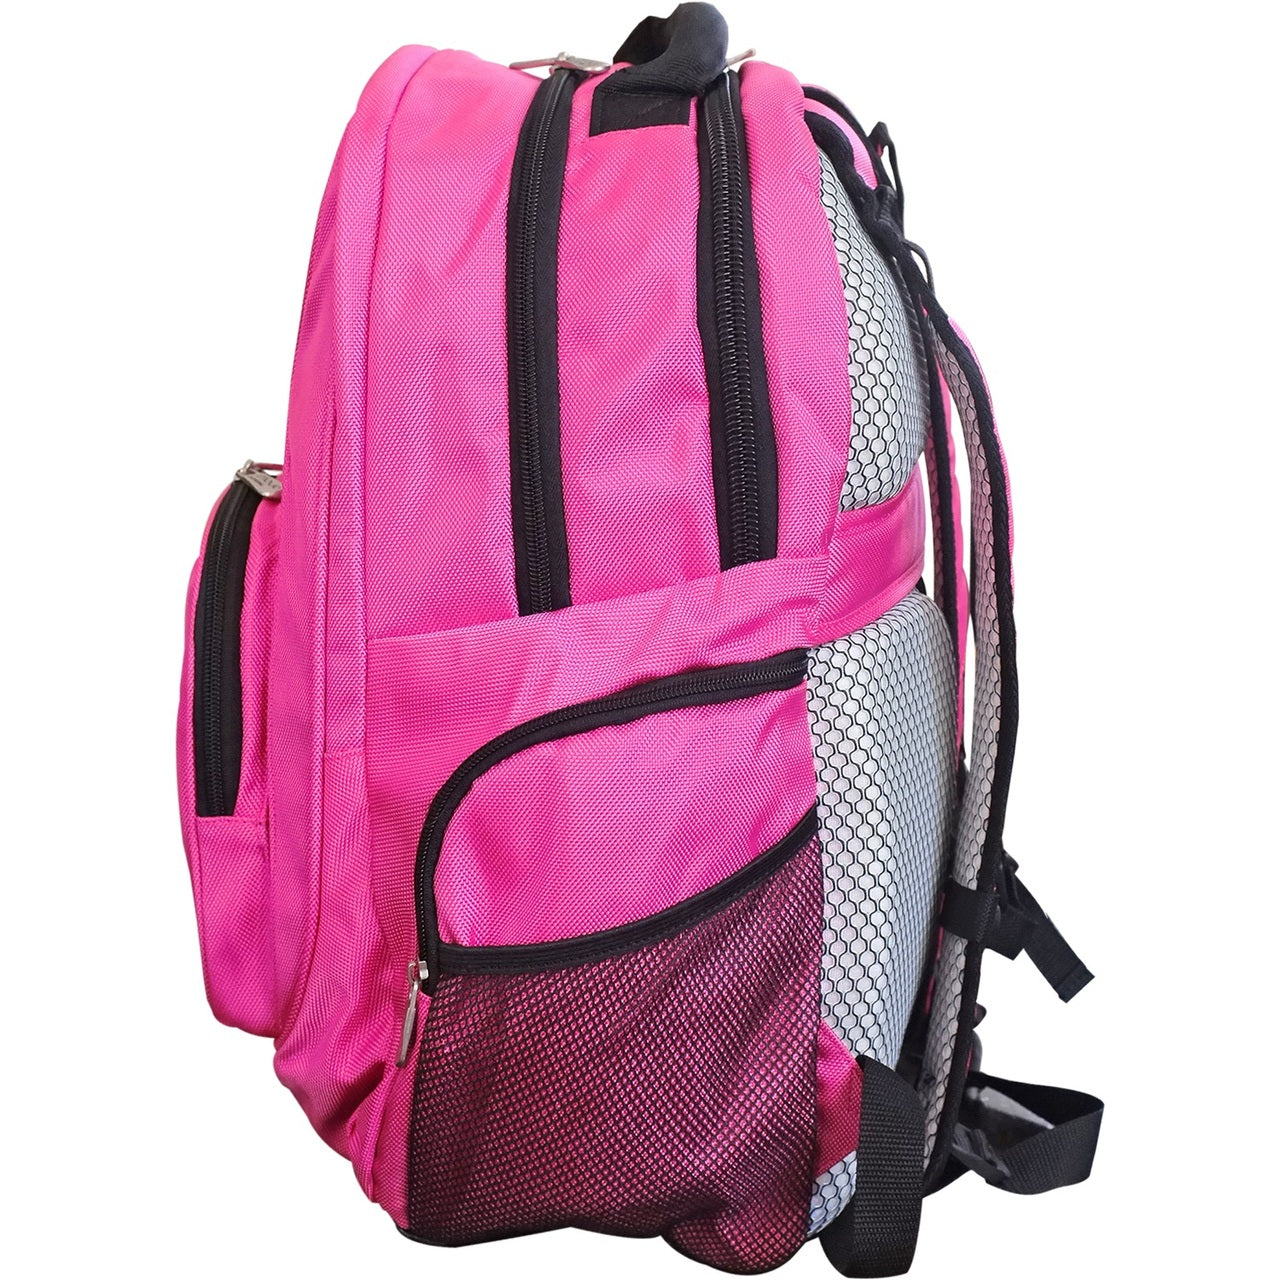 Indiana Pacers Laptop Backpack Pink